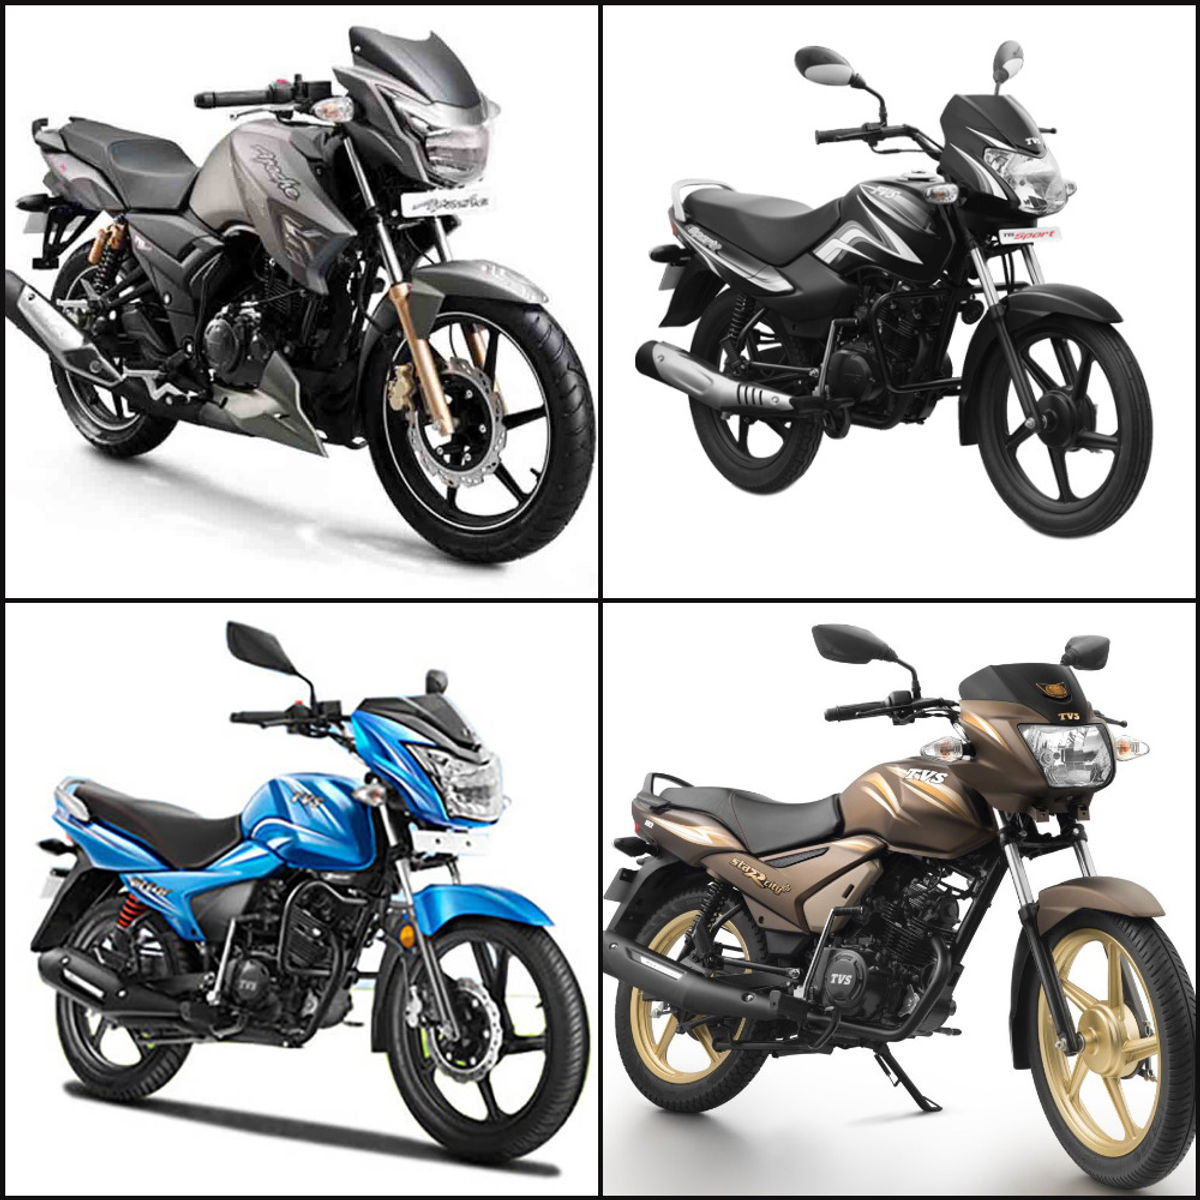 December 2018 Offers: TVS Apache RTR 160 And Victor Get Discounts December 2018 Offers: TVS Apache RTR 160 And Victor Get Discounts